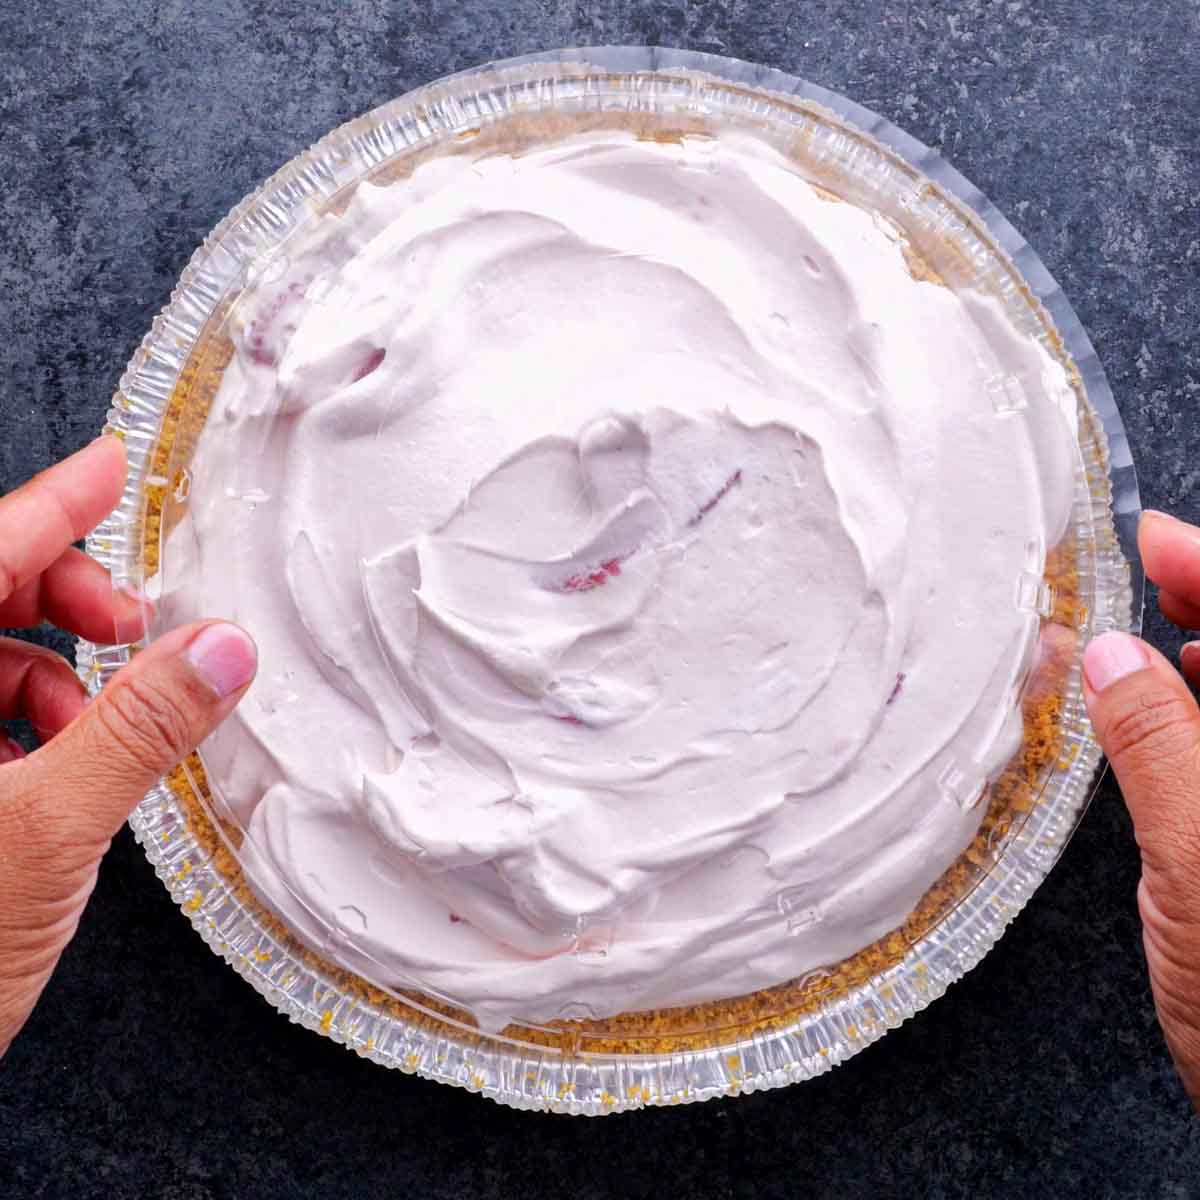 A person holding a pie with strawberry filling top.